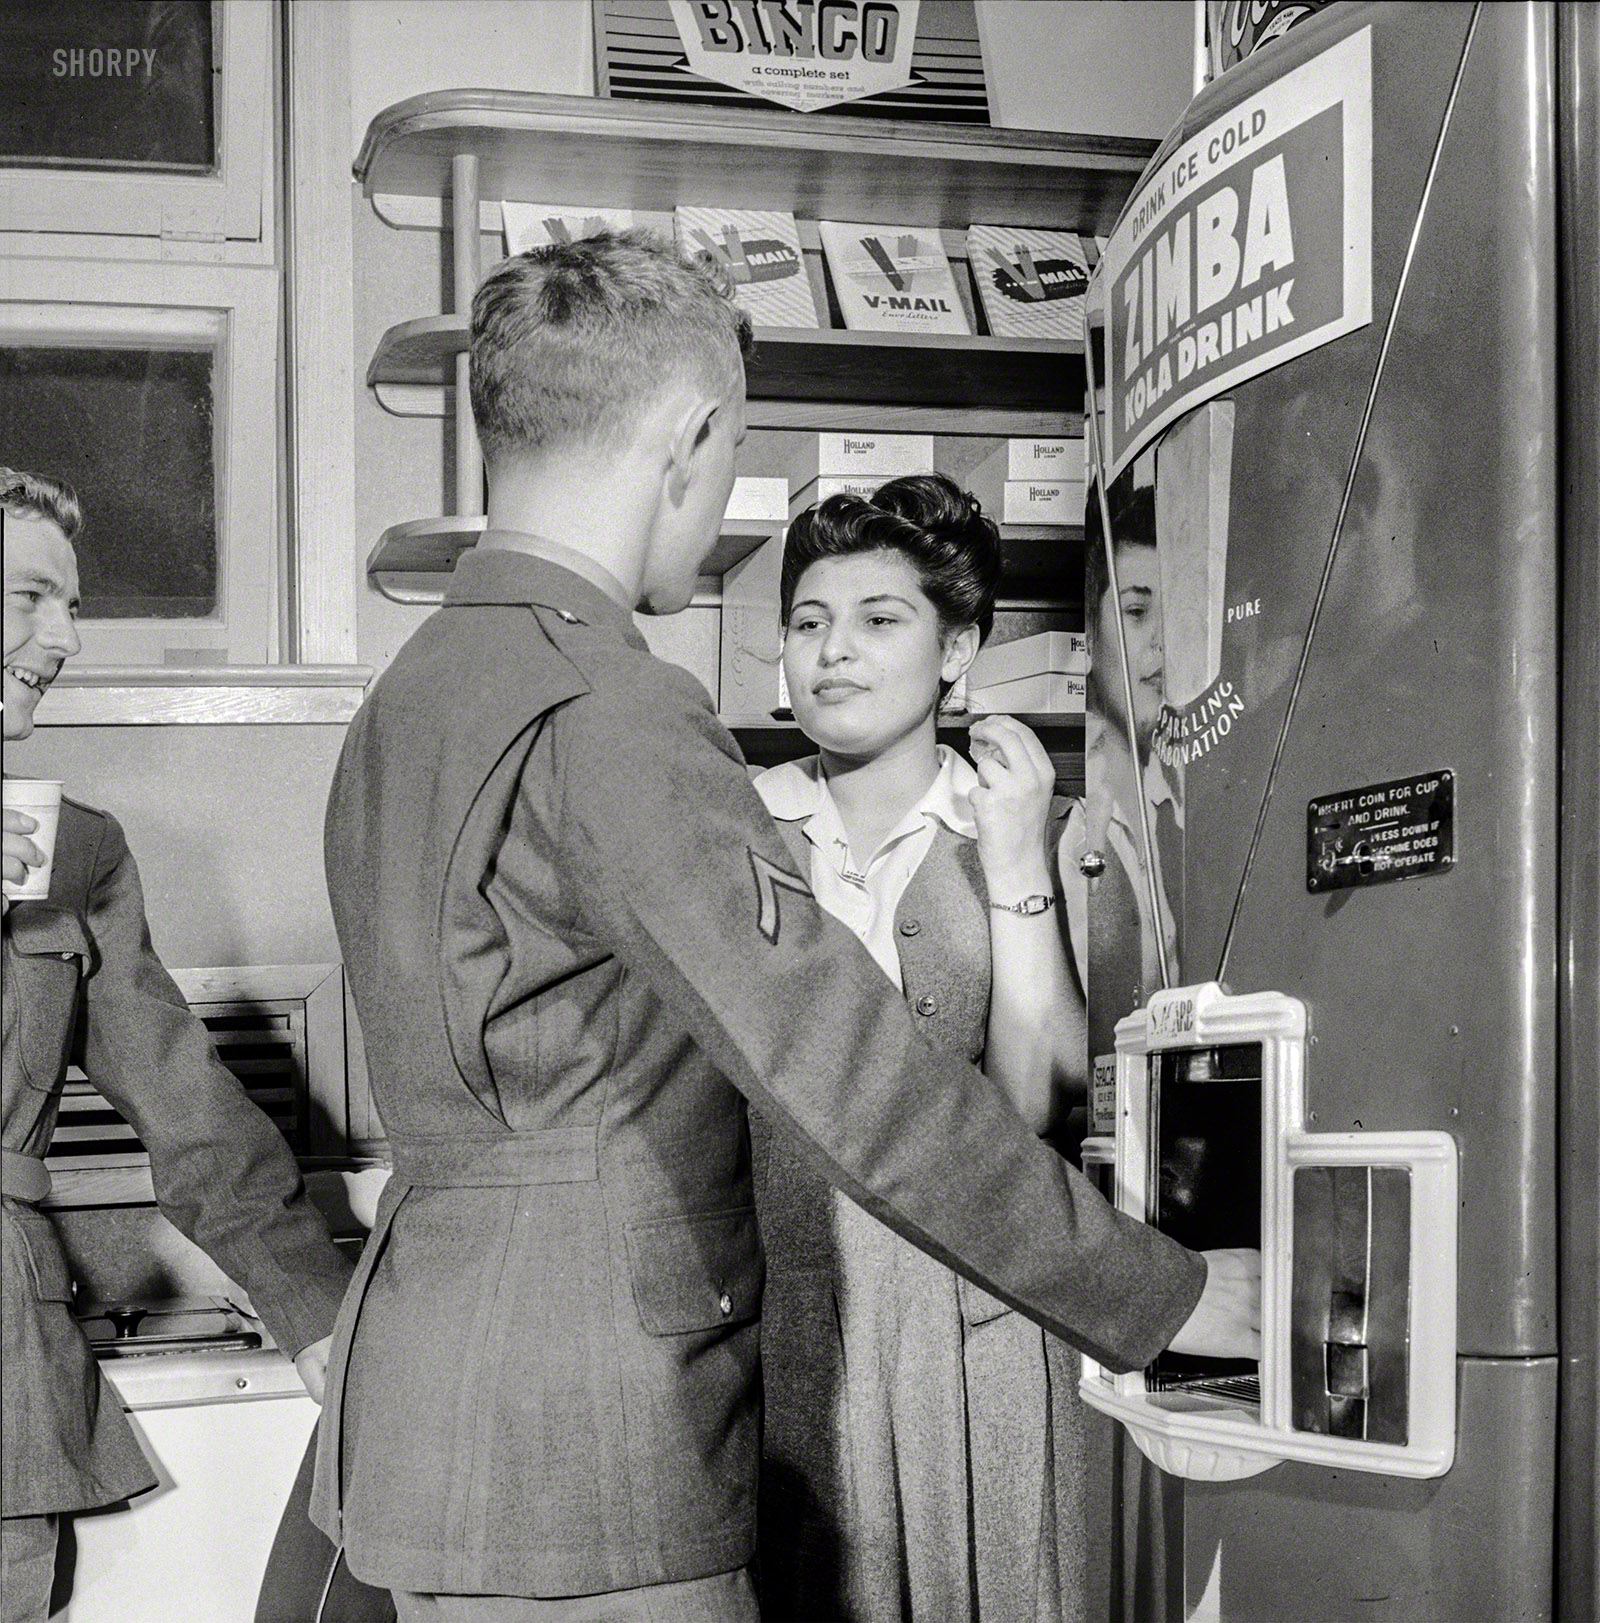 June 1943. Arlington, Virginia. "A soldier treating his date to a coke in the service shop at Idaho Hall, Arlington Farms, a residence for women who work in the U.S. government for the duration of the war." The Zimba Kola people (as well as the Coca-Cola Co., whose logo is barely visible above the machine) would probably be pained to see their products referred to as lowercase-generic "coke." Photo by Esther Bubley for the Office of War Information. View full size.